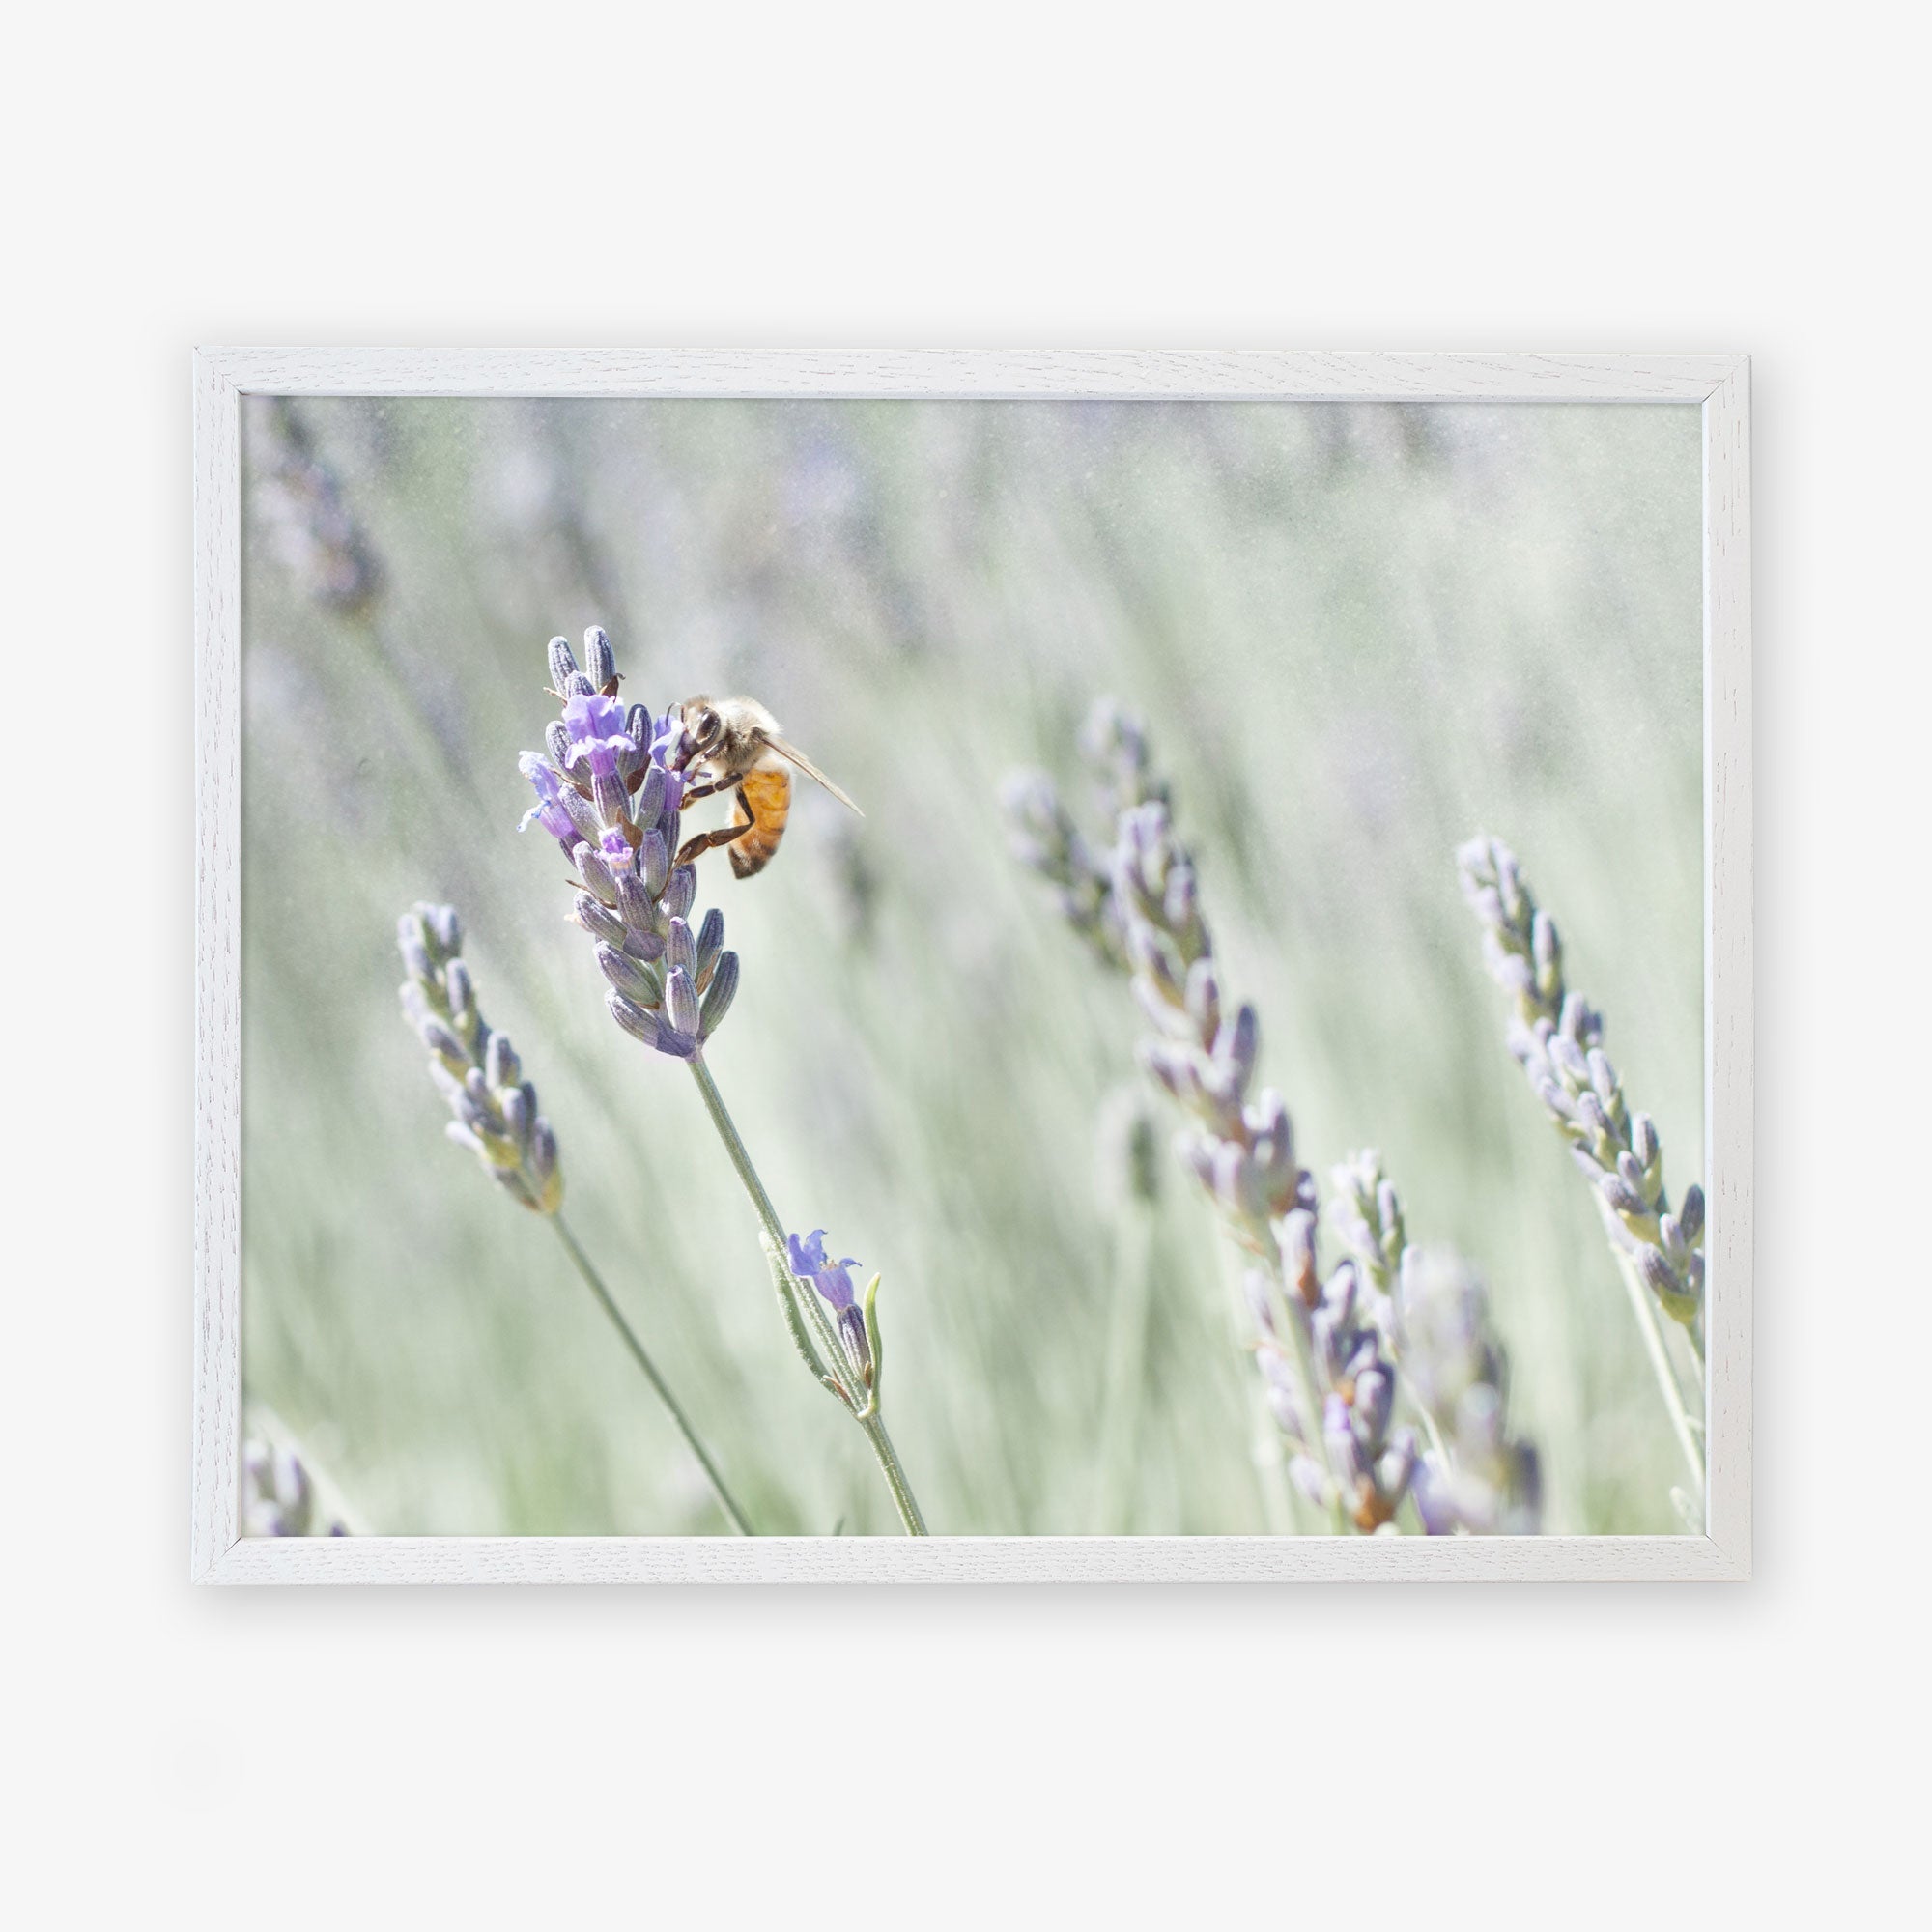 A bee collecting pollen on a lavender flower, framed in a simple white border, against a soft-focus background of a lavender farm. Offley Green&#39;s Rustic Floral Print, &#39;Lavender for Bees&#39;.